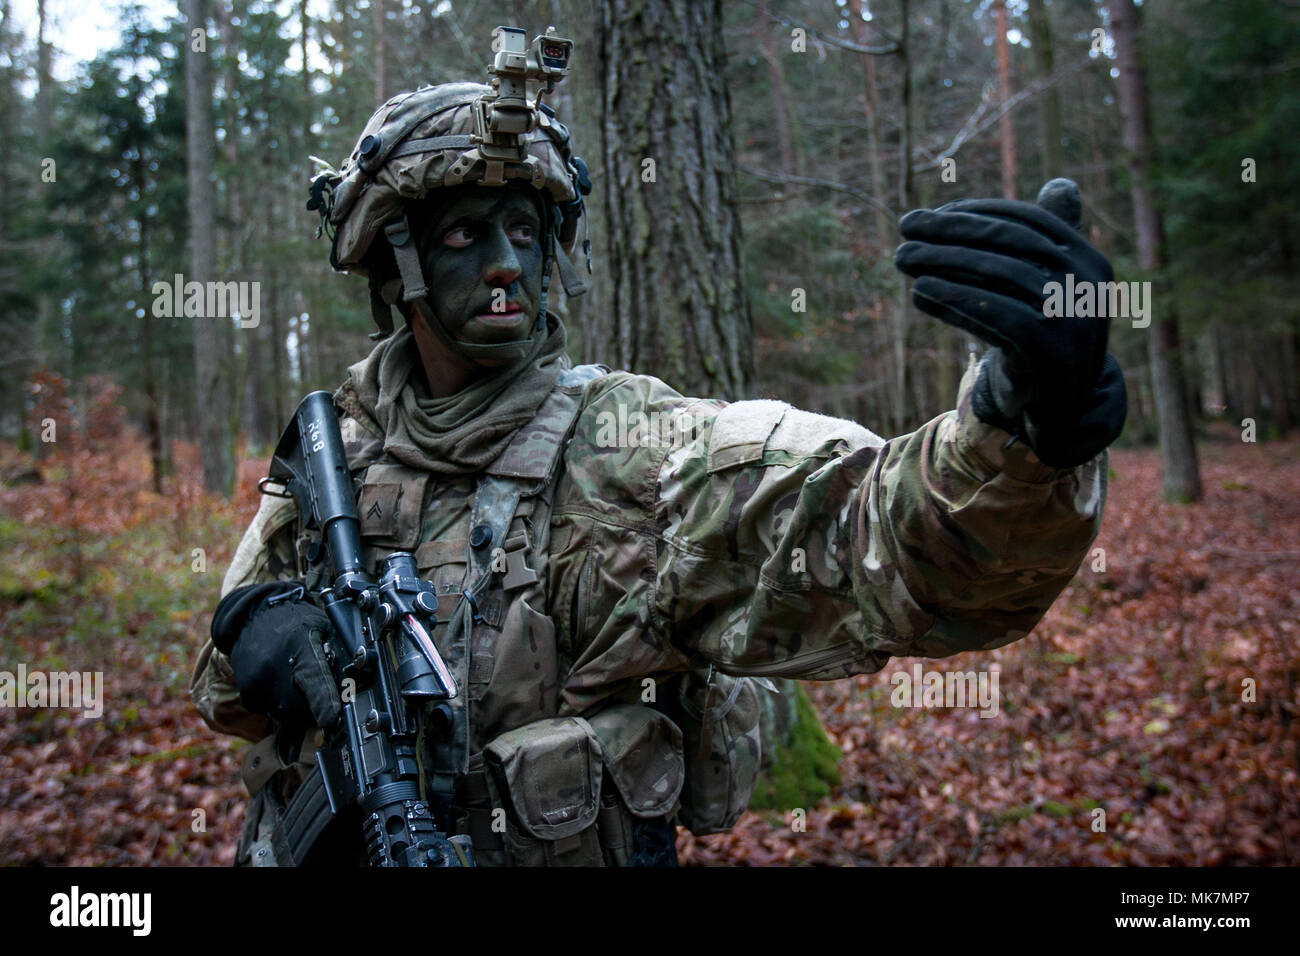 Cpl. Brad Olin, assigned to Company C, 2nd Battalion, 70th Armor Regiment, 2nd Armored Brigade Combat Team, 1st Infantry Division from Fort Riley, Kansas signals to his team to continue to advancing towards their objective on Nov. 18, 2017 during an Allied Spirit VII training event in Grafenwoehr, Germany. The U.S. Army, along with its allies and partners, continues to forge a dynamic presence with a powerful land network that simultaneously deters aggression and assures the security of the region. Approximately 3,700 service members from 13 nations gather together in 7th Army Training Command Stock Photo